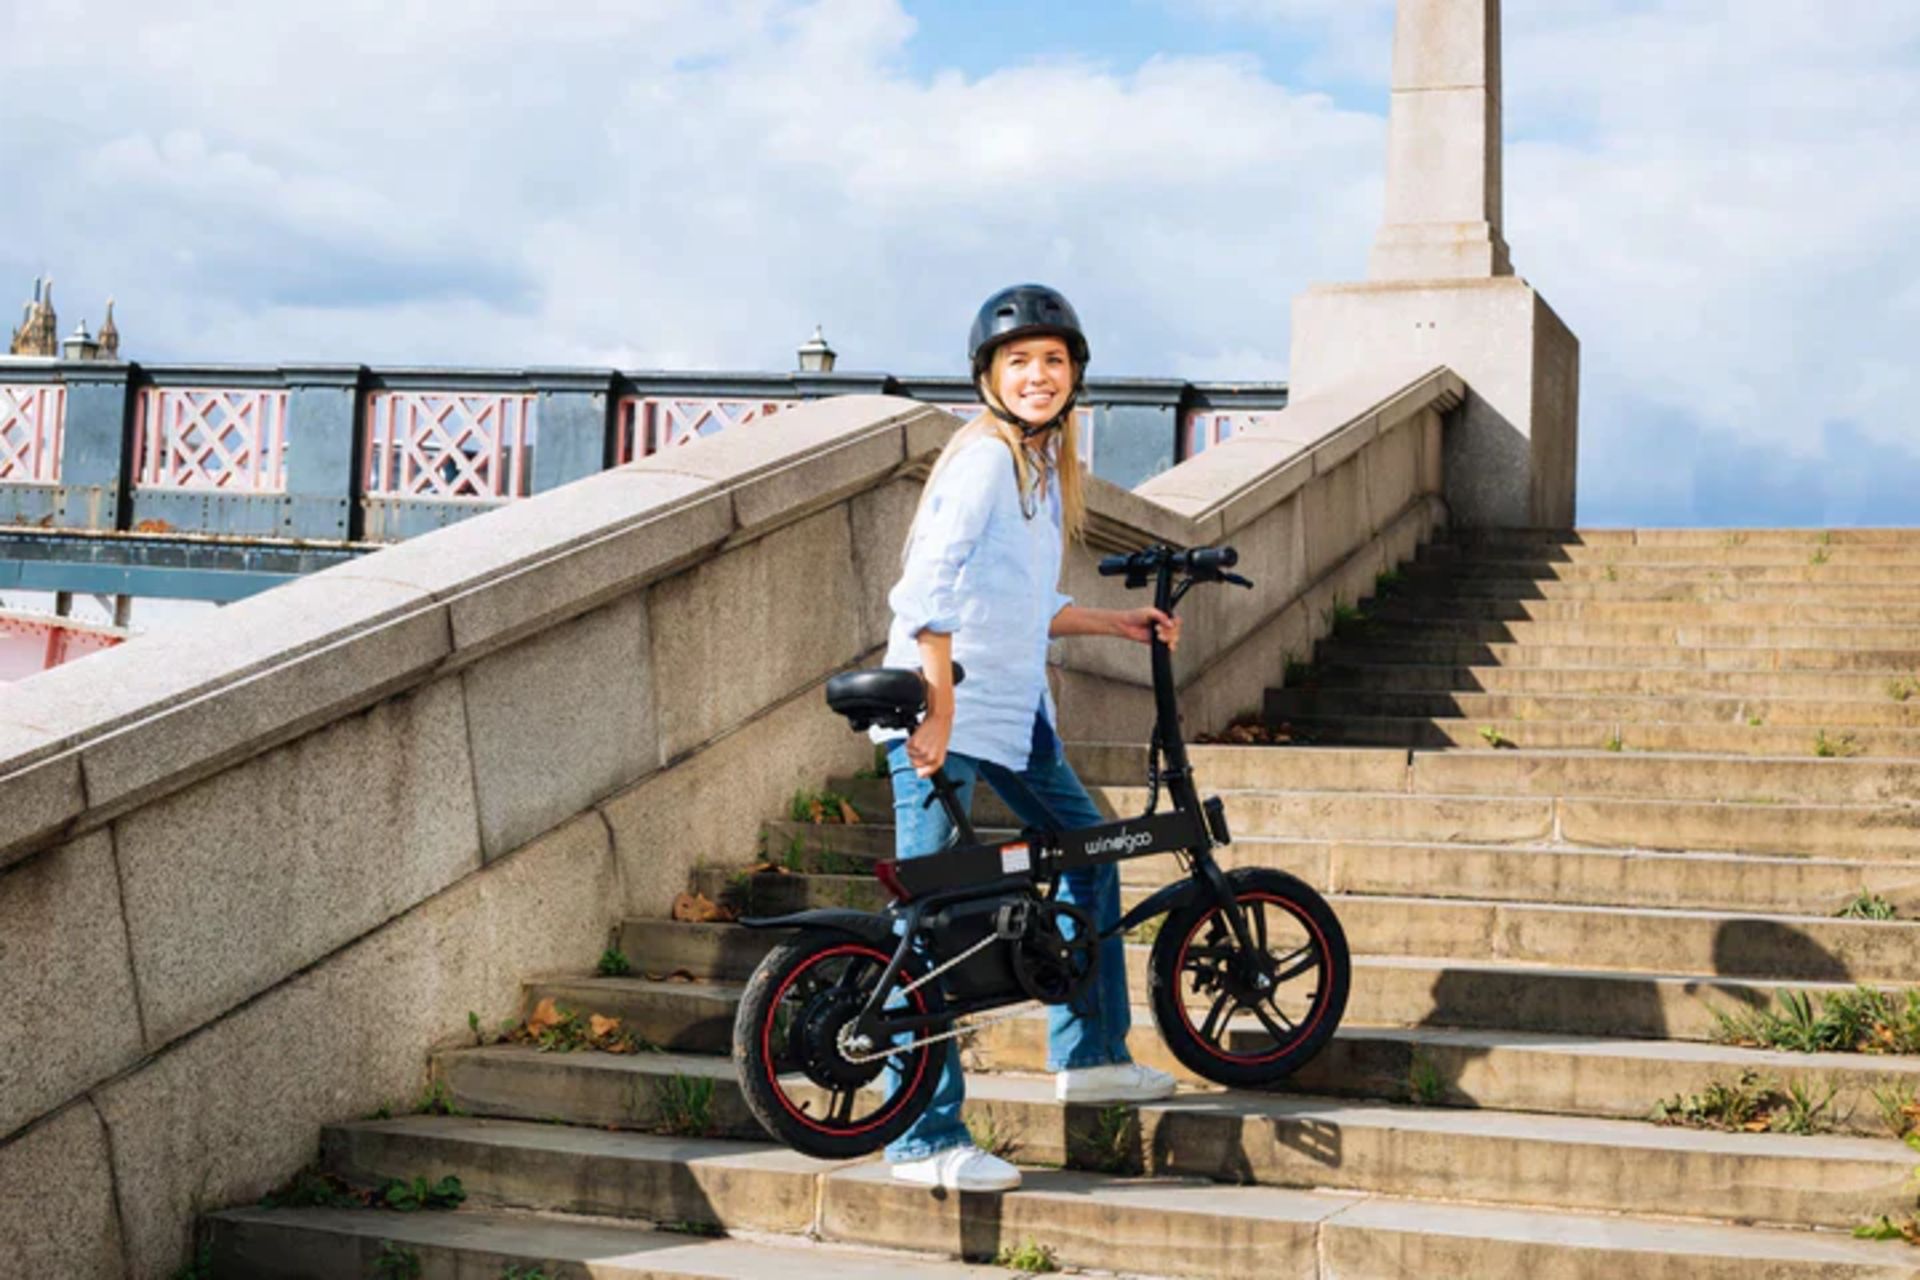 5 X Windgoo B20 Pro Electric Bike. RRP £1,100.99. With 16-inch-wide tires and a frame of upgraded - Image 6 of 7